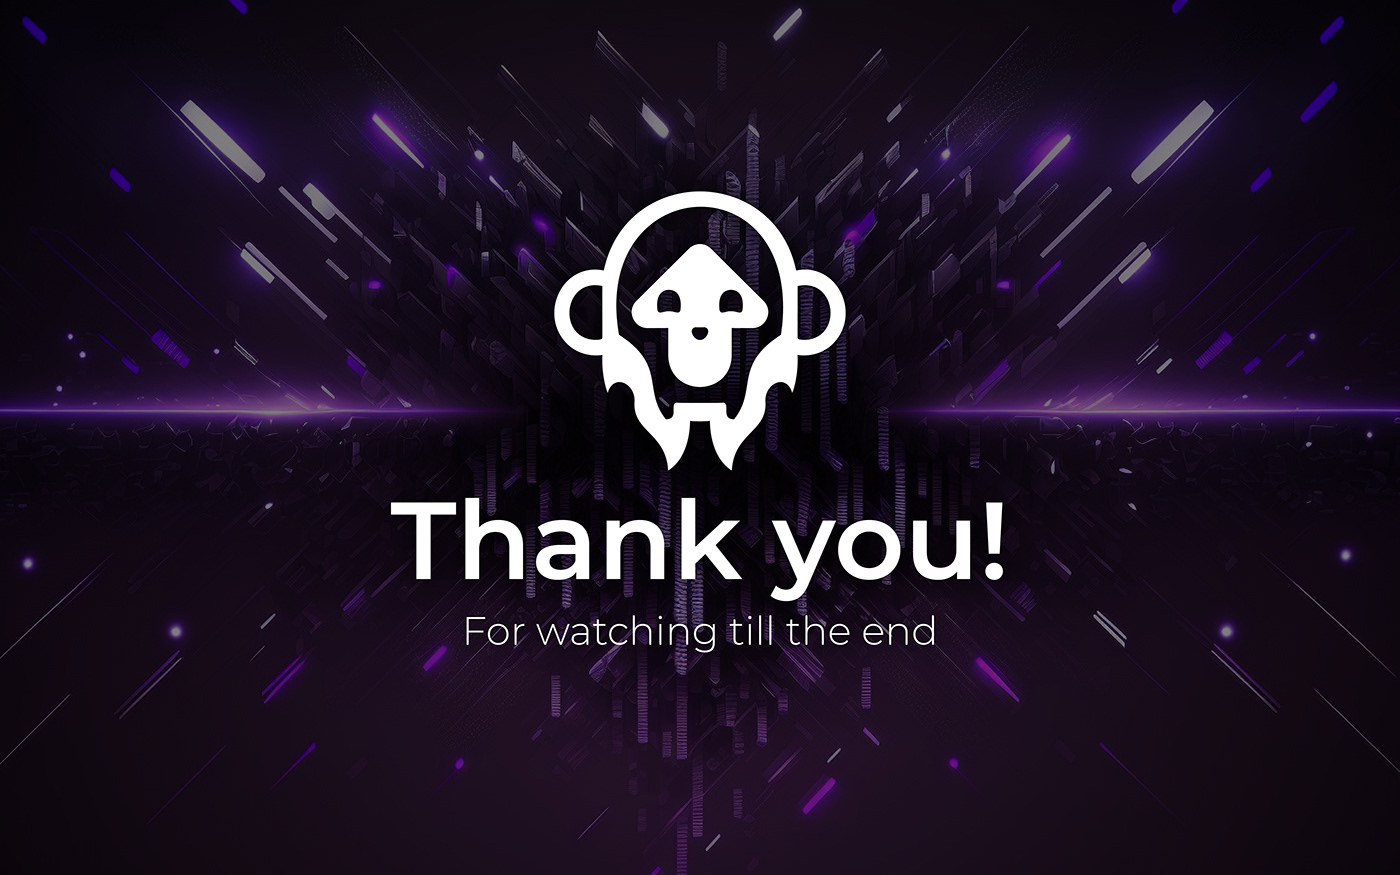 Image of the thank you poster at the end, with the MonkeyPump Logo